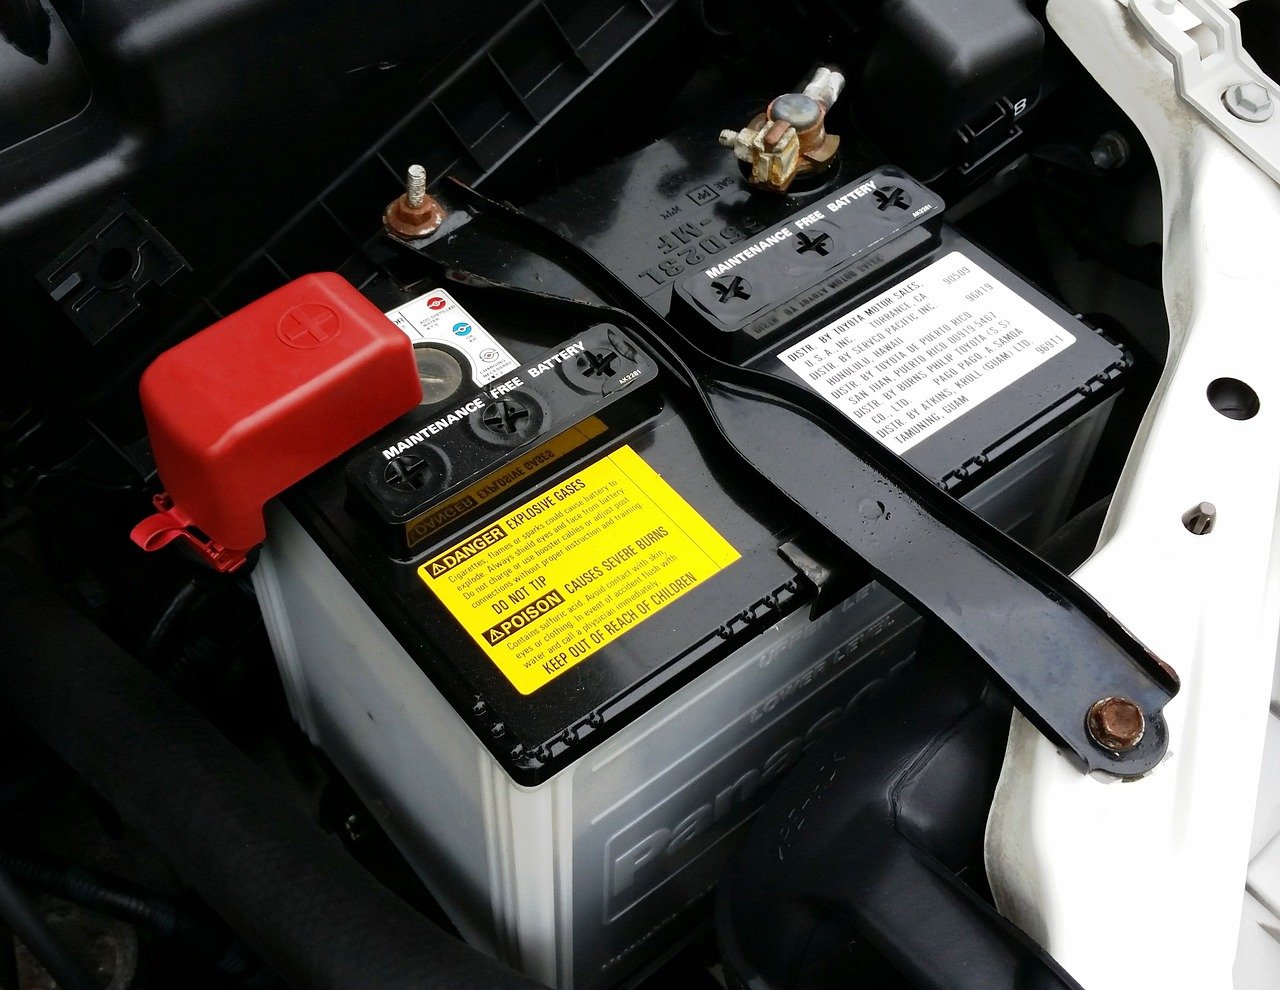 How Much Should A Car Battery Cost?